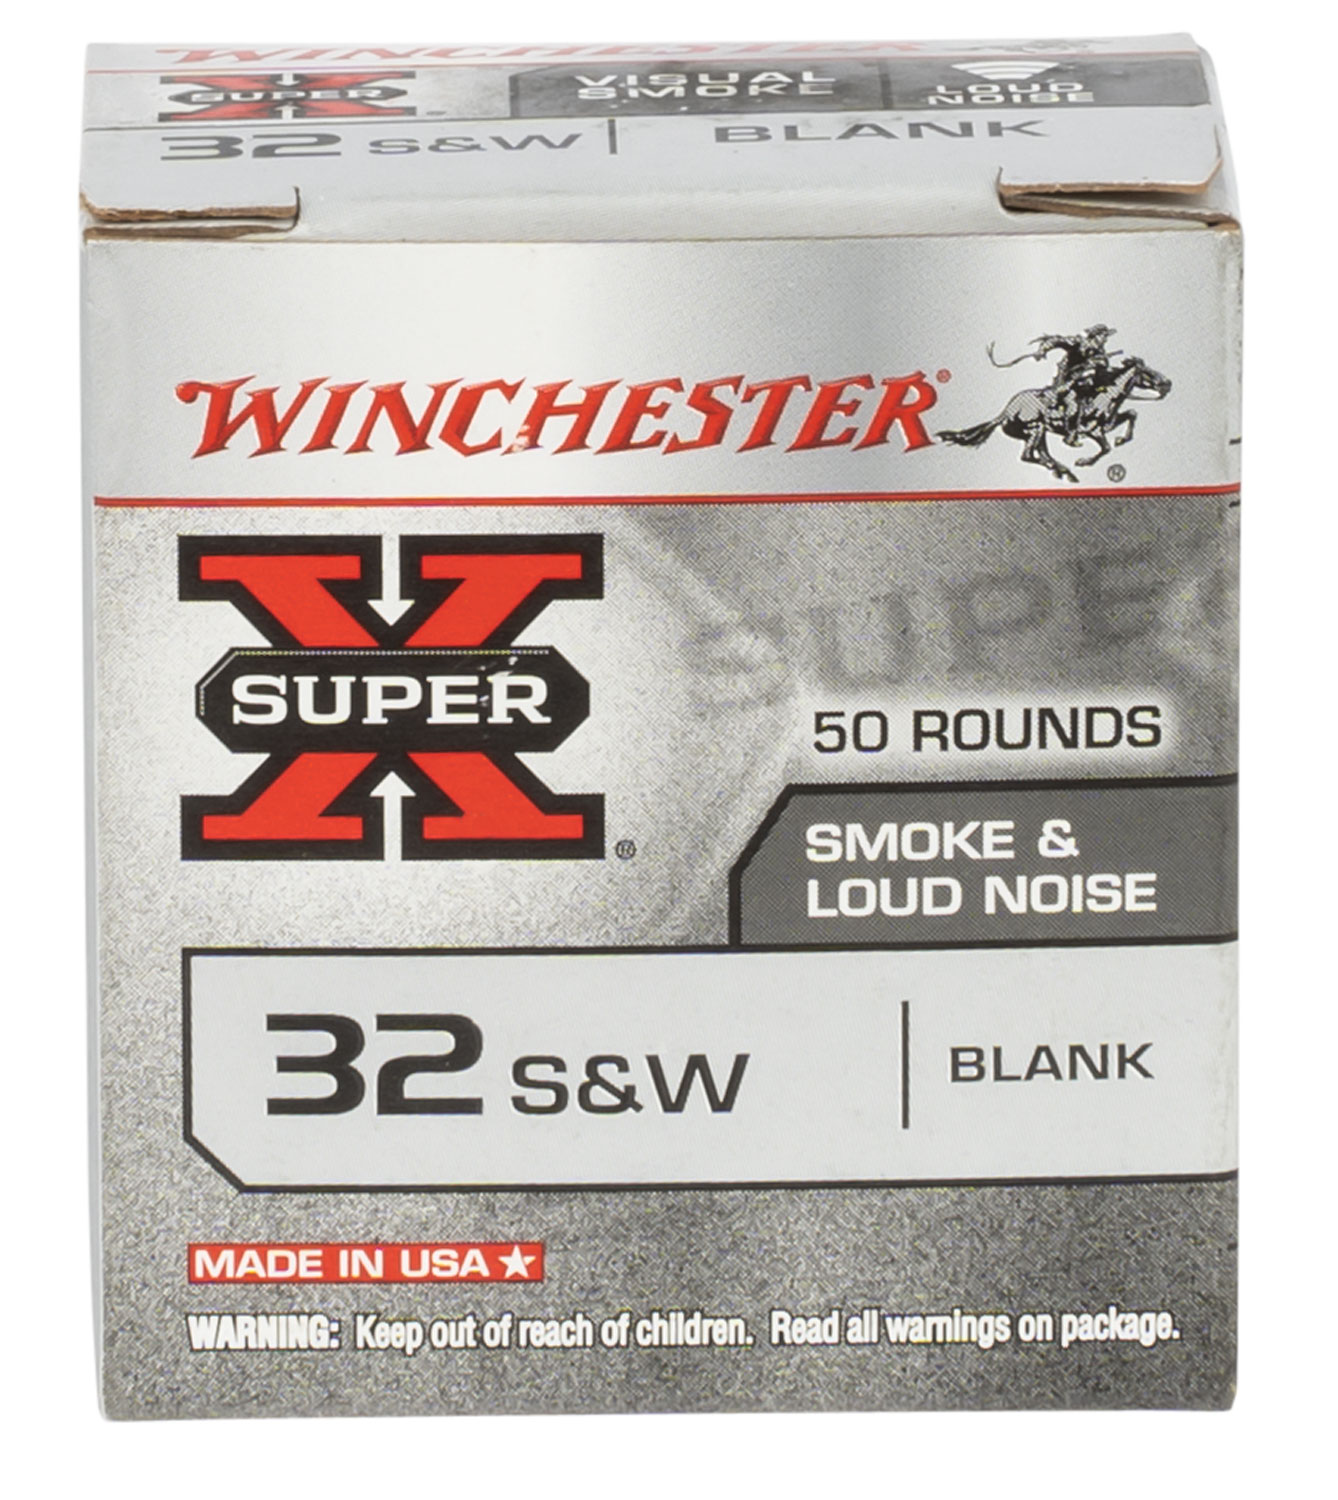 Winchester Ammo 32BL2PW Super-X Blank Rounds 32 S&W 50 Bx/ 100 Cs